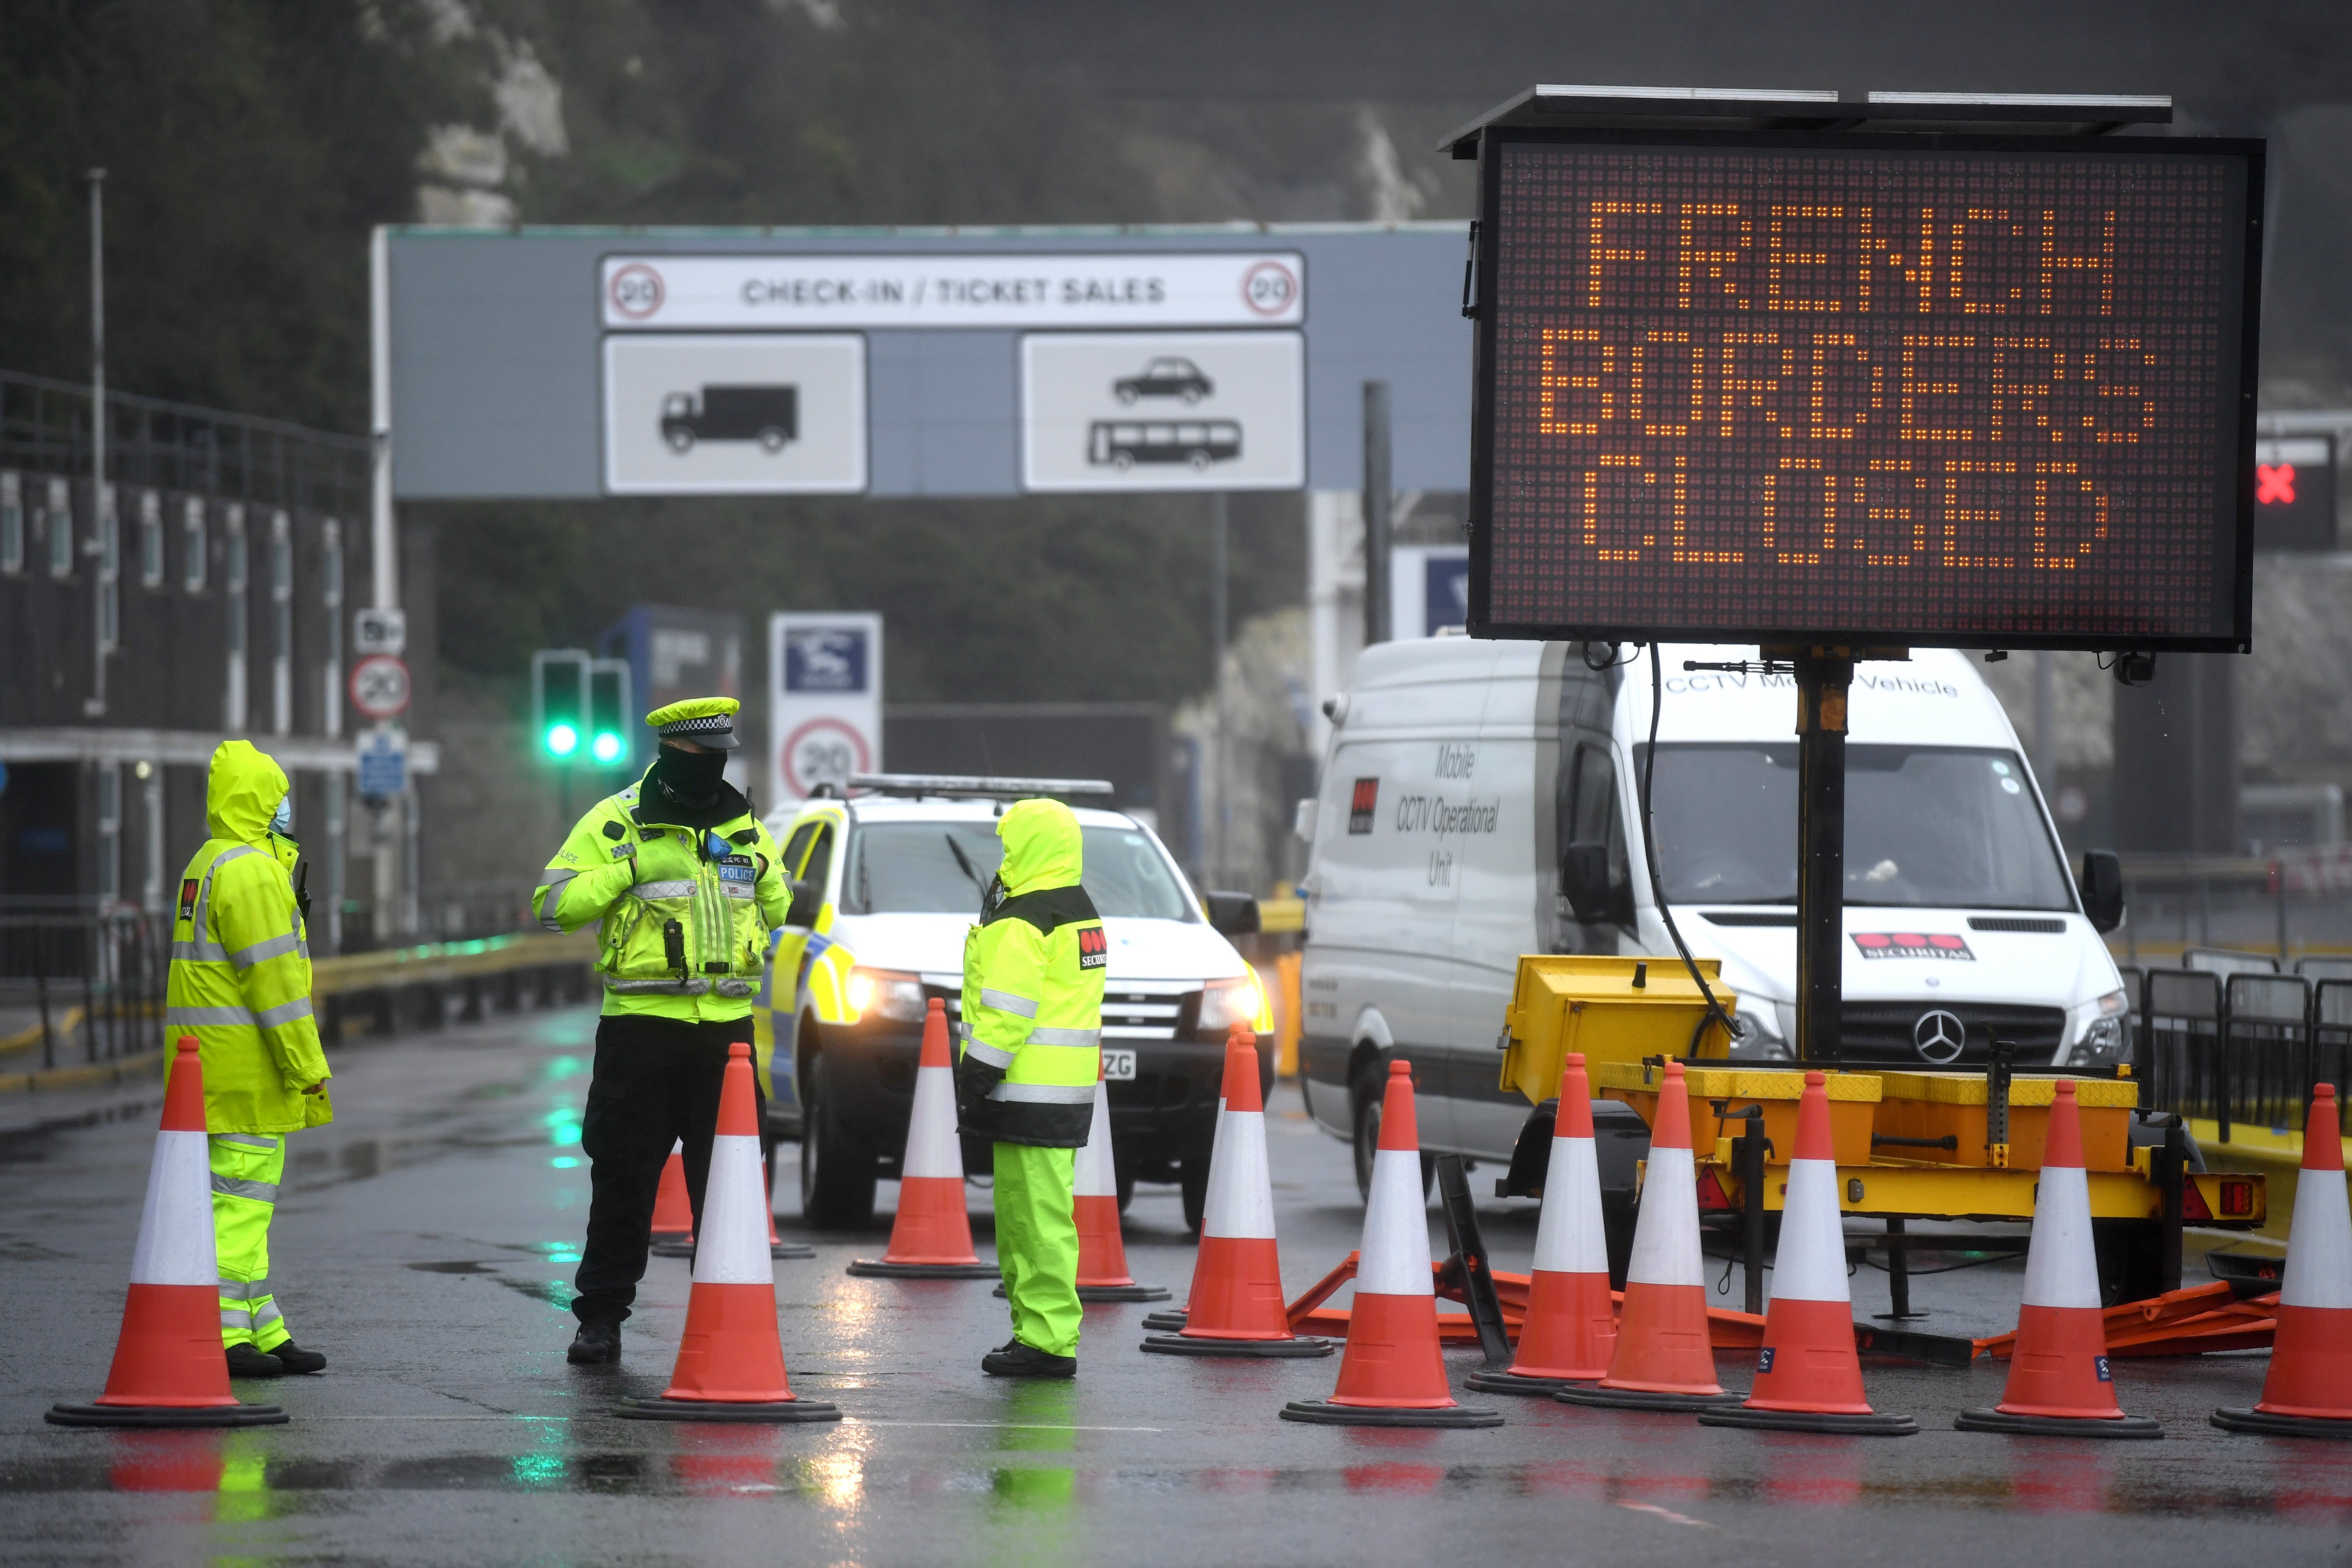 France has closed its borders to the UK following an outbreak of a new variant of Covid-19